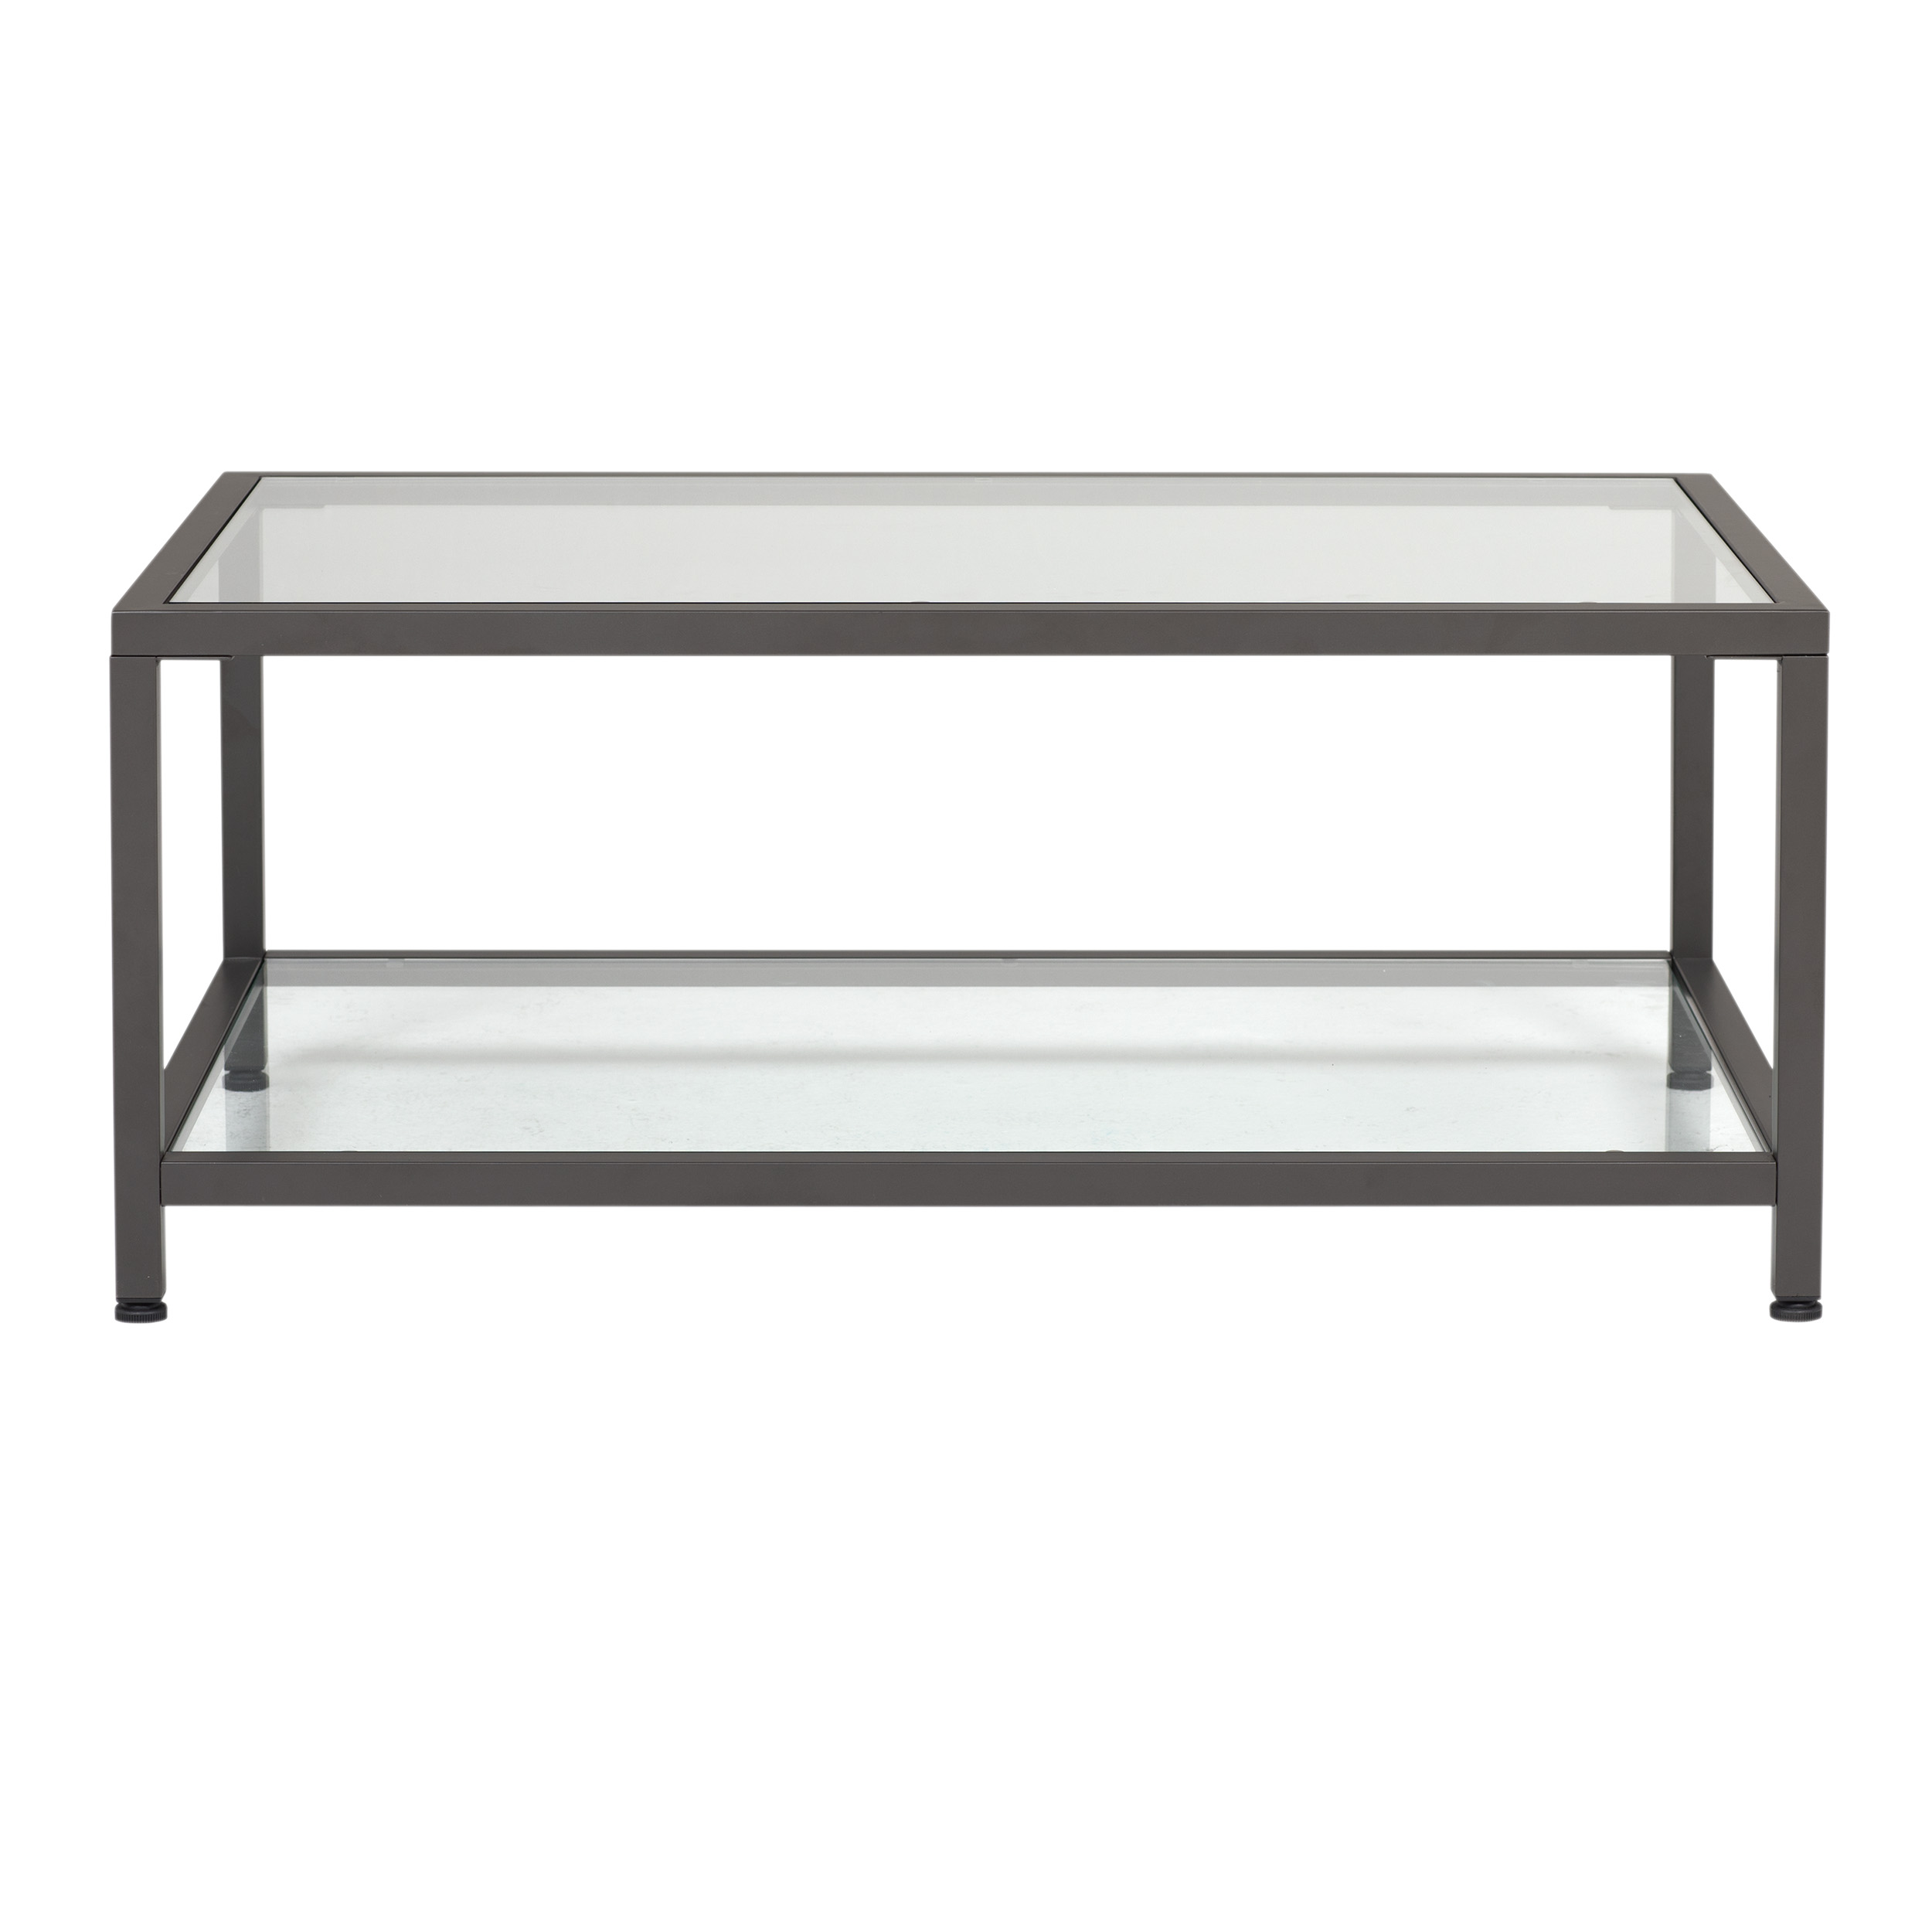 71031 Camber 36 Rectangle Coffee Table front